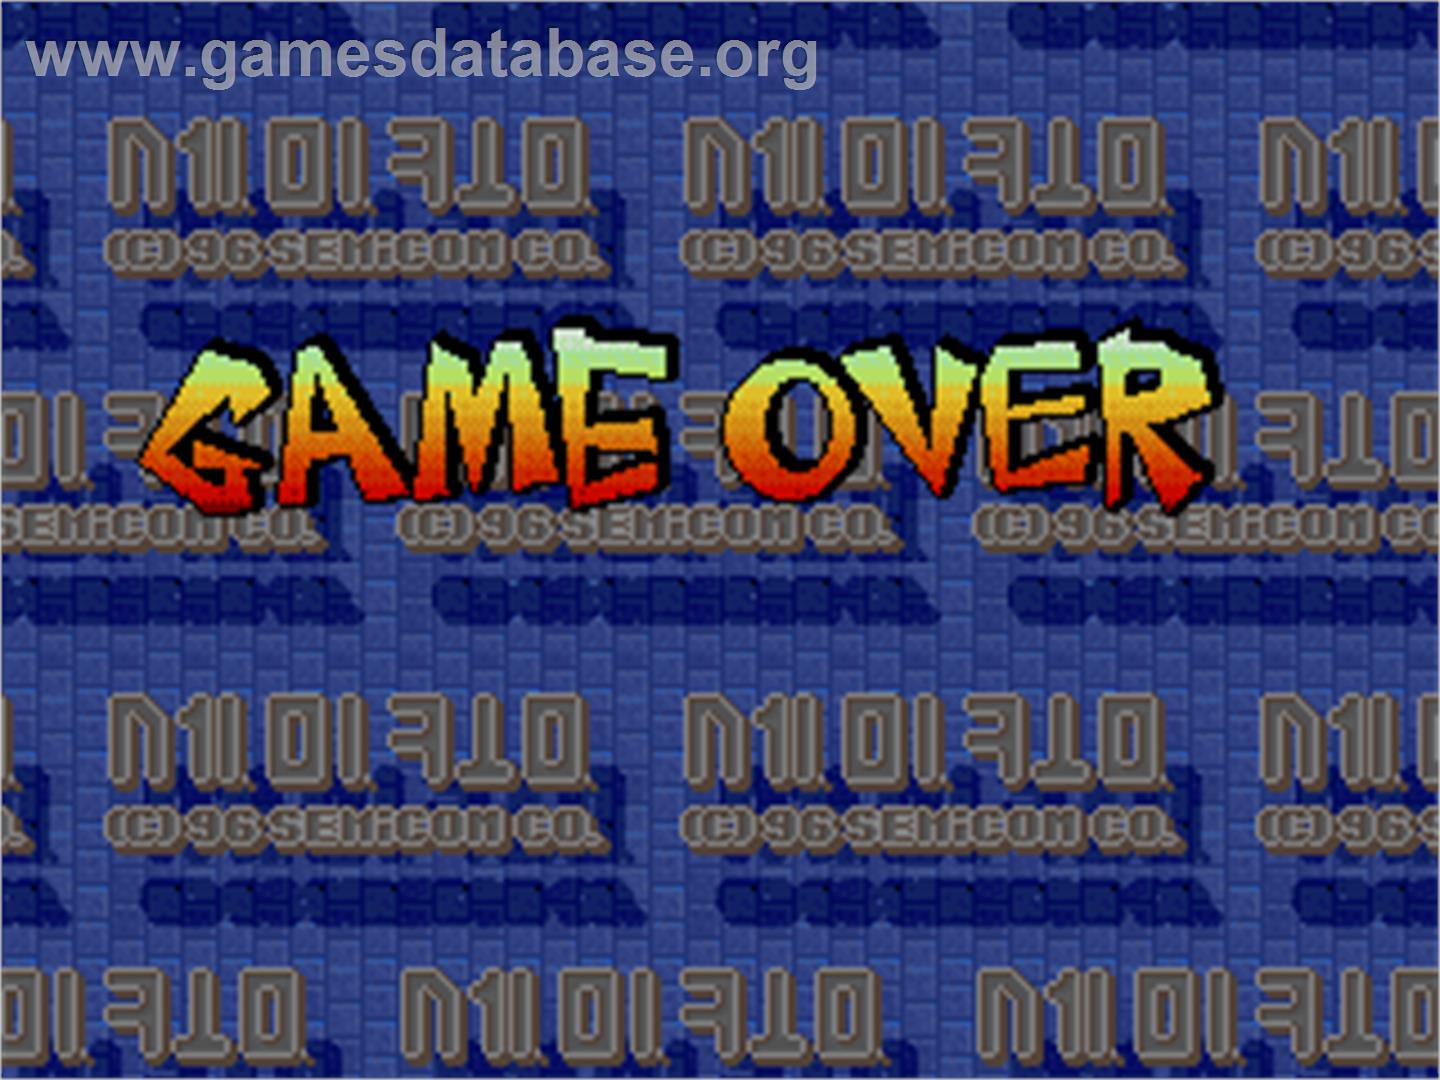 SD Fighters - Arcade - Artwork - Game Over Screen